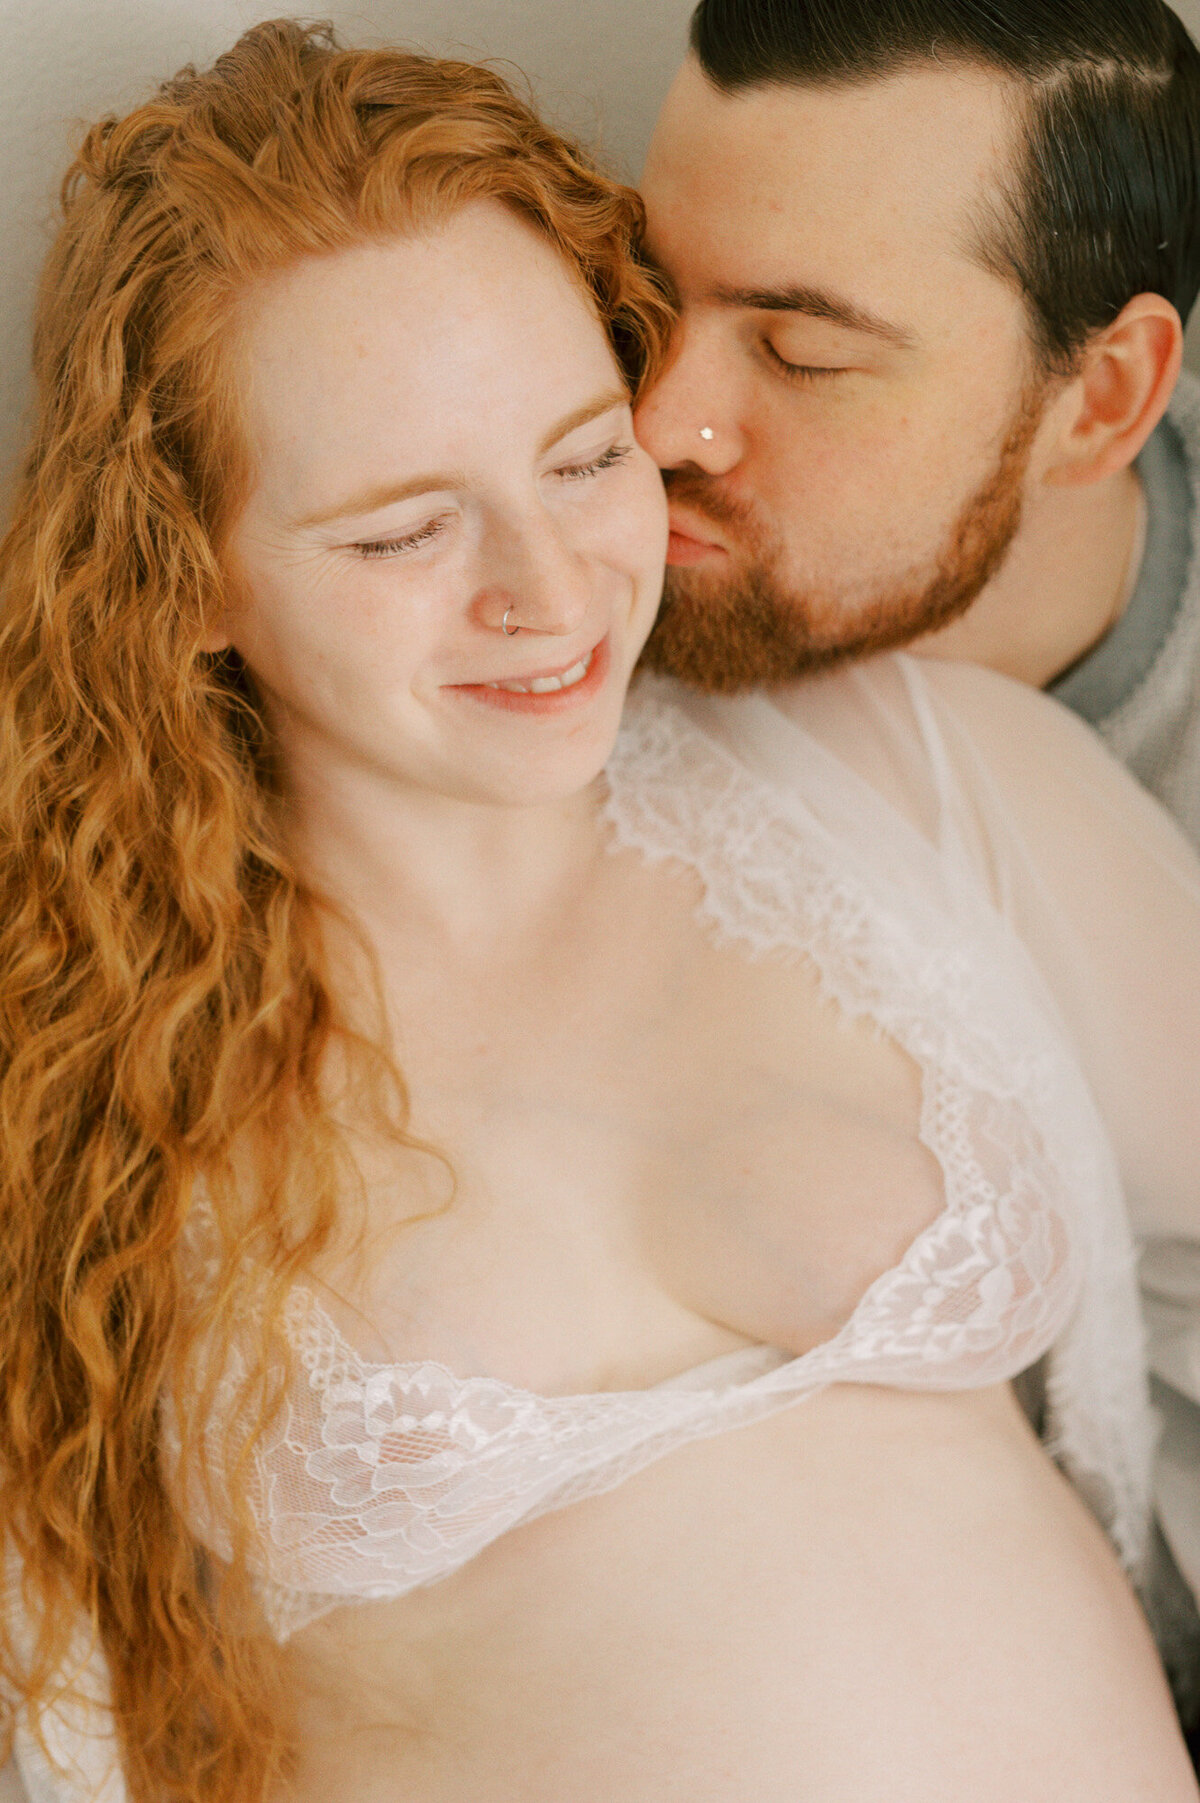 intimate-maternity-boudoir-session-25